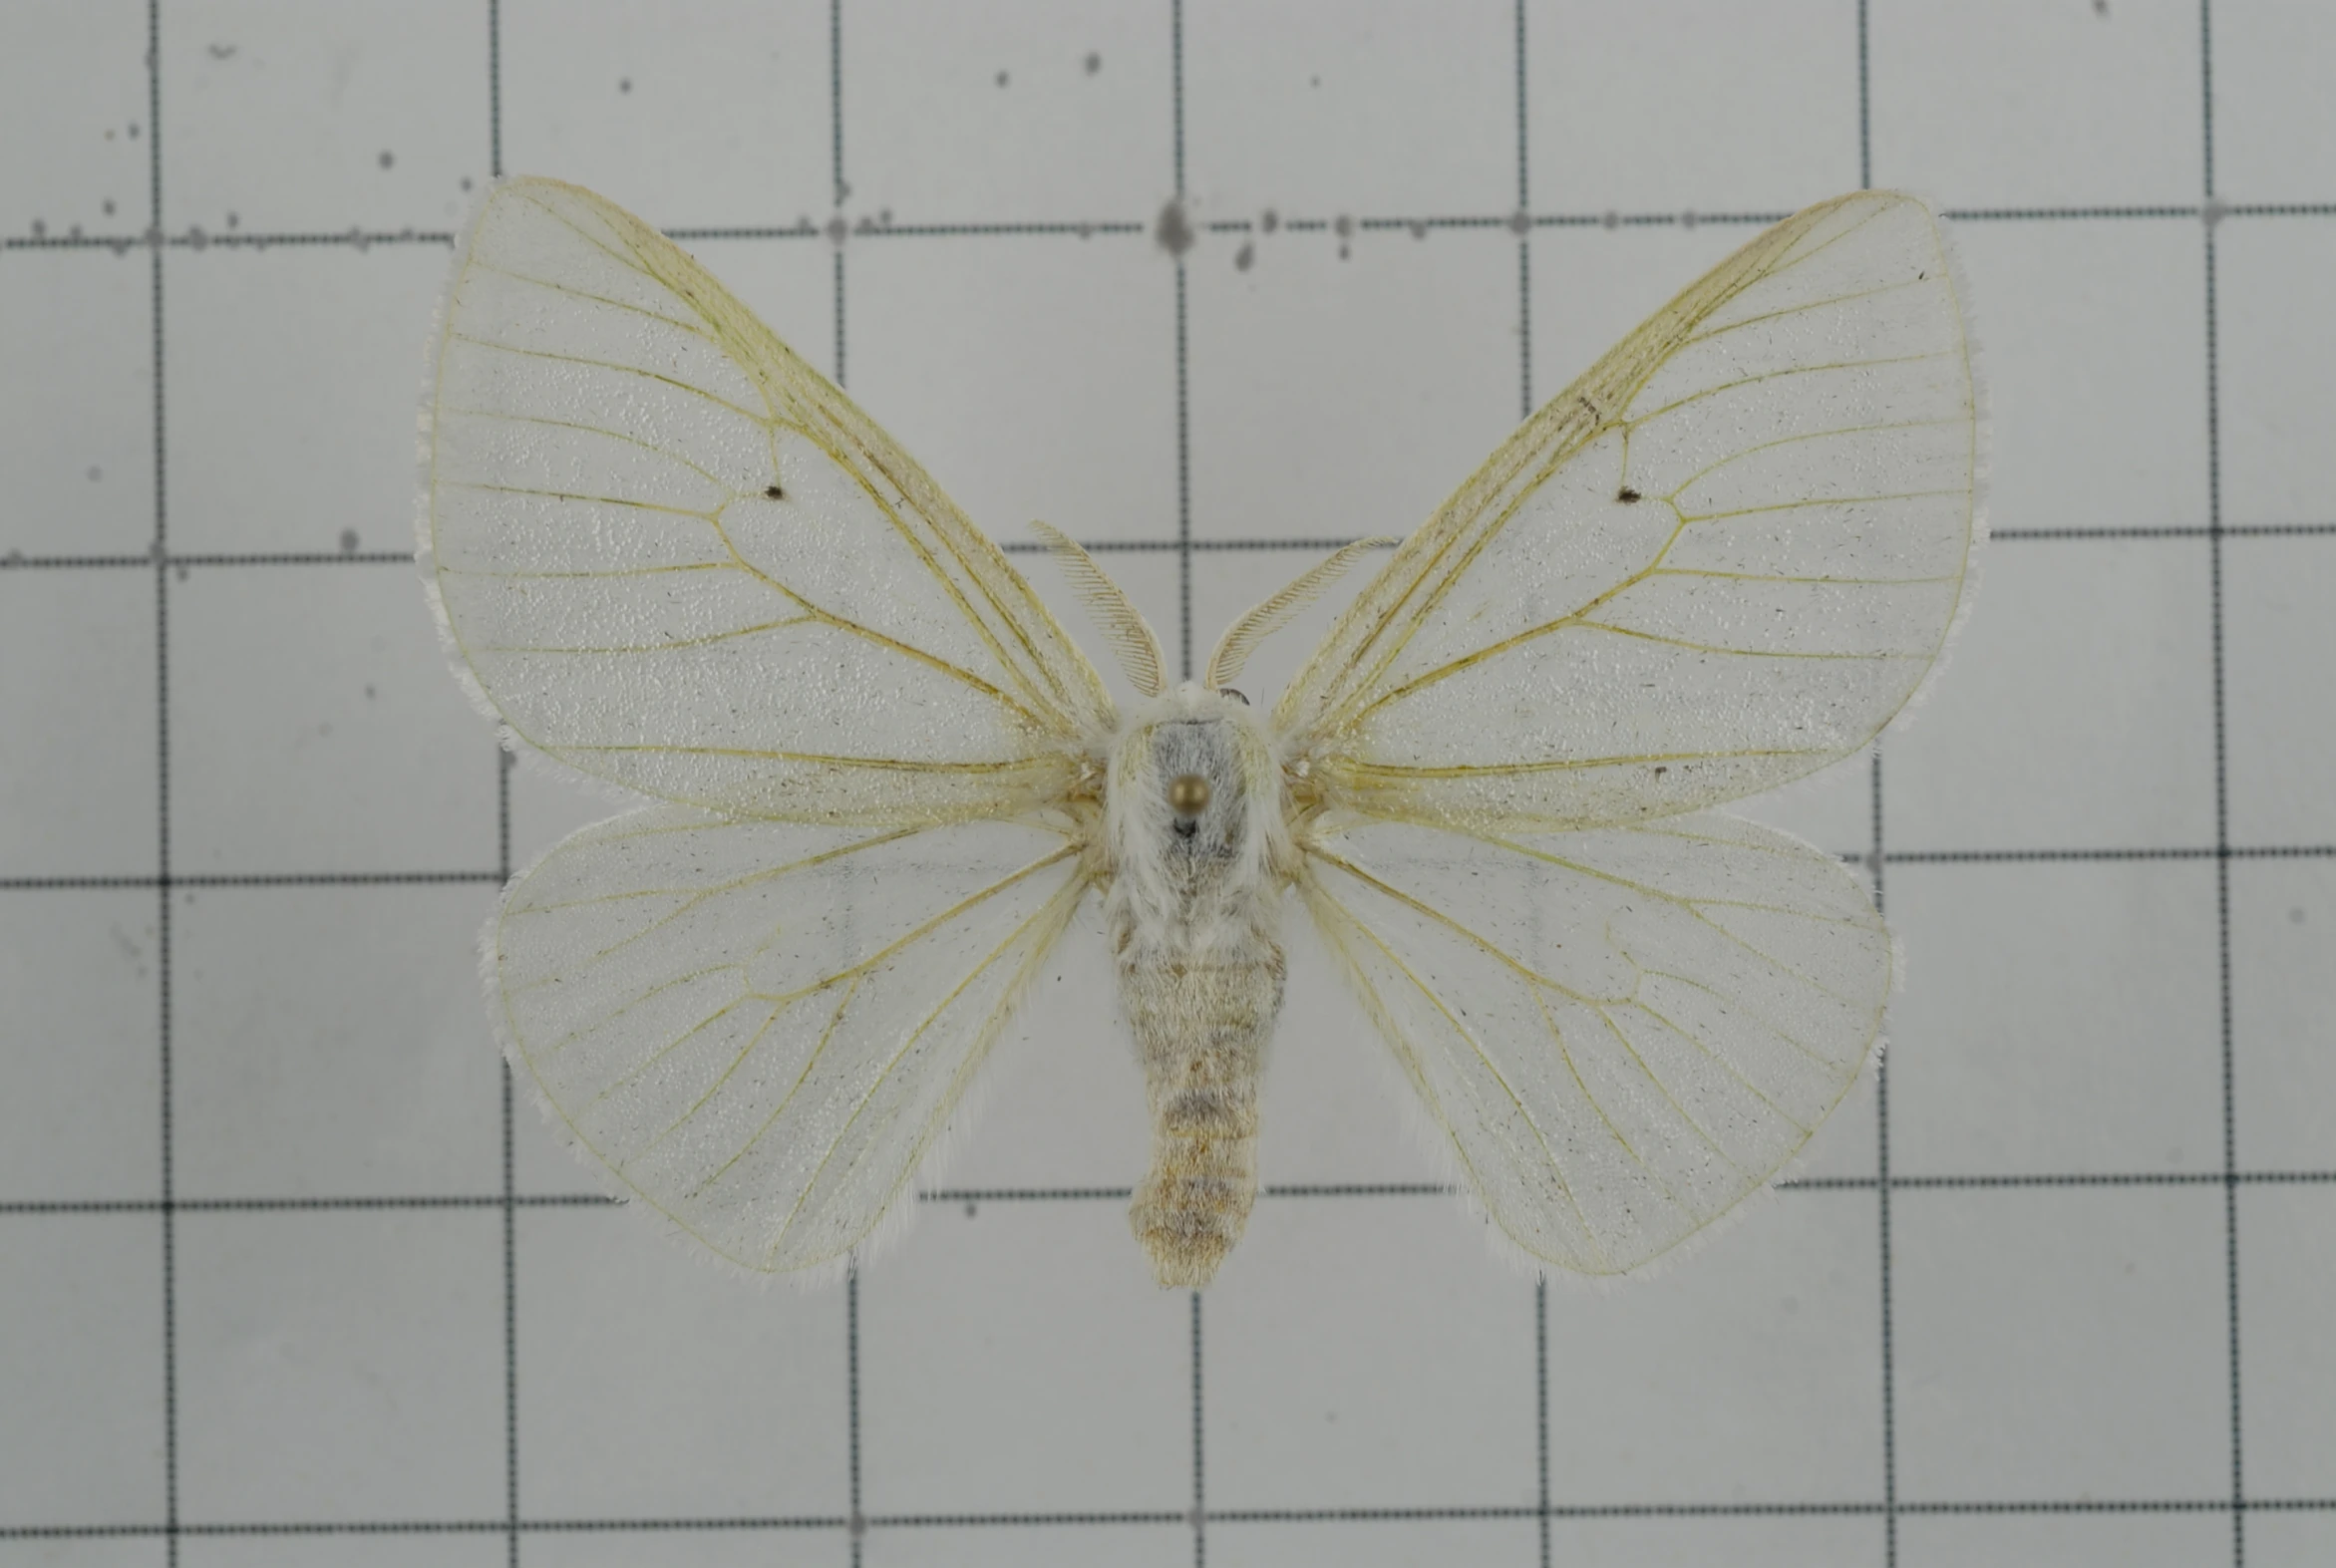 the underside of a small white erfly on top of a ruler